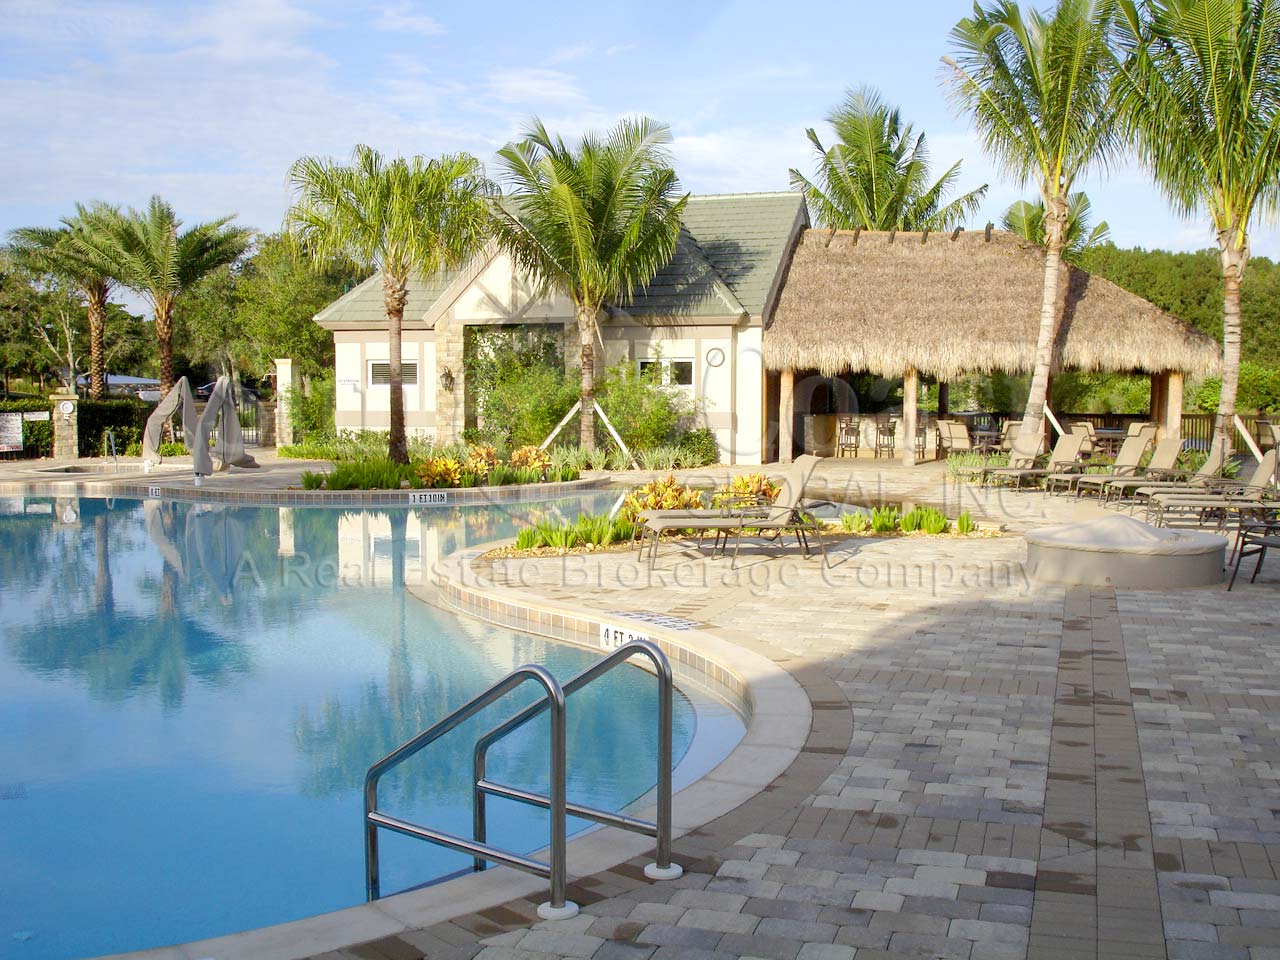 TWIN EAGLES Golf and Country Club pool area and tiki hut